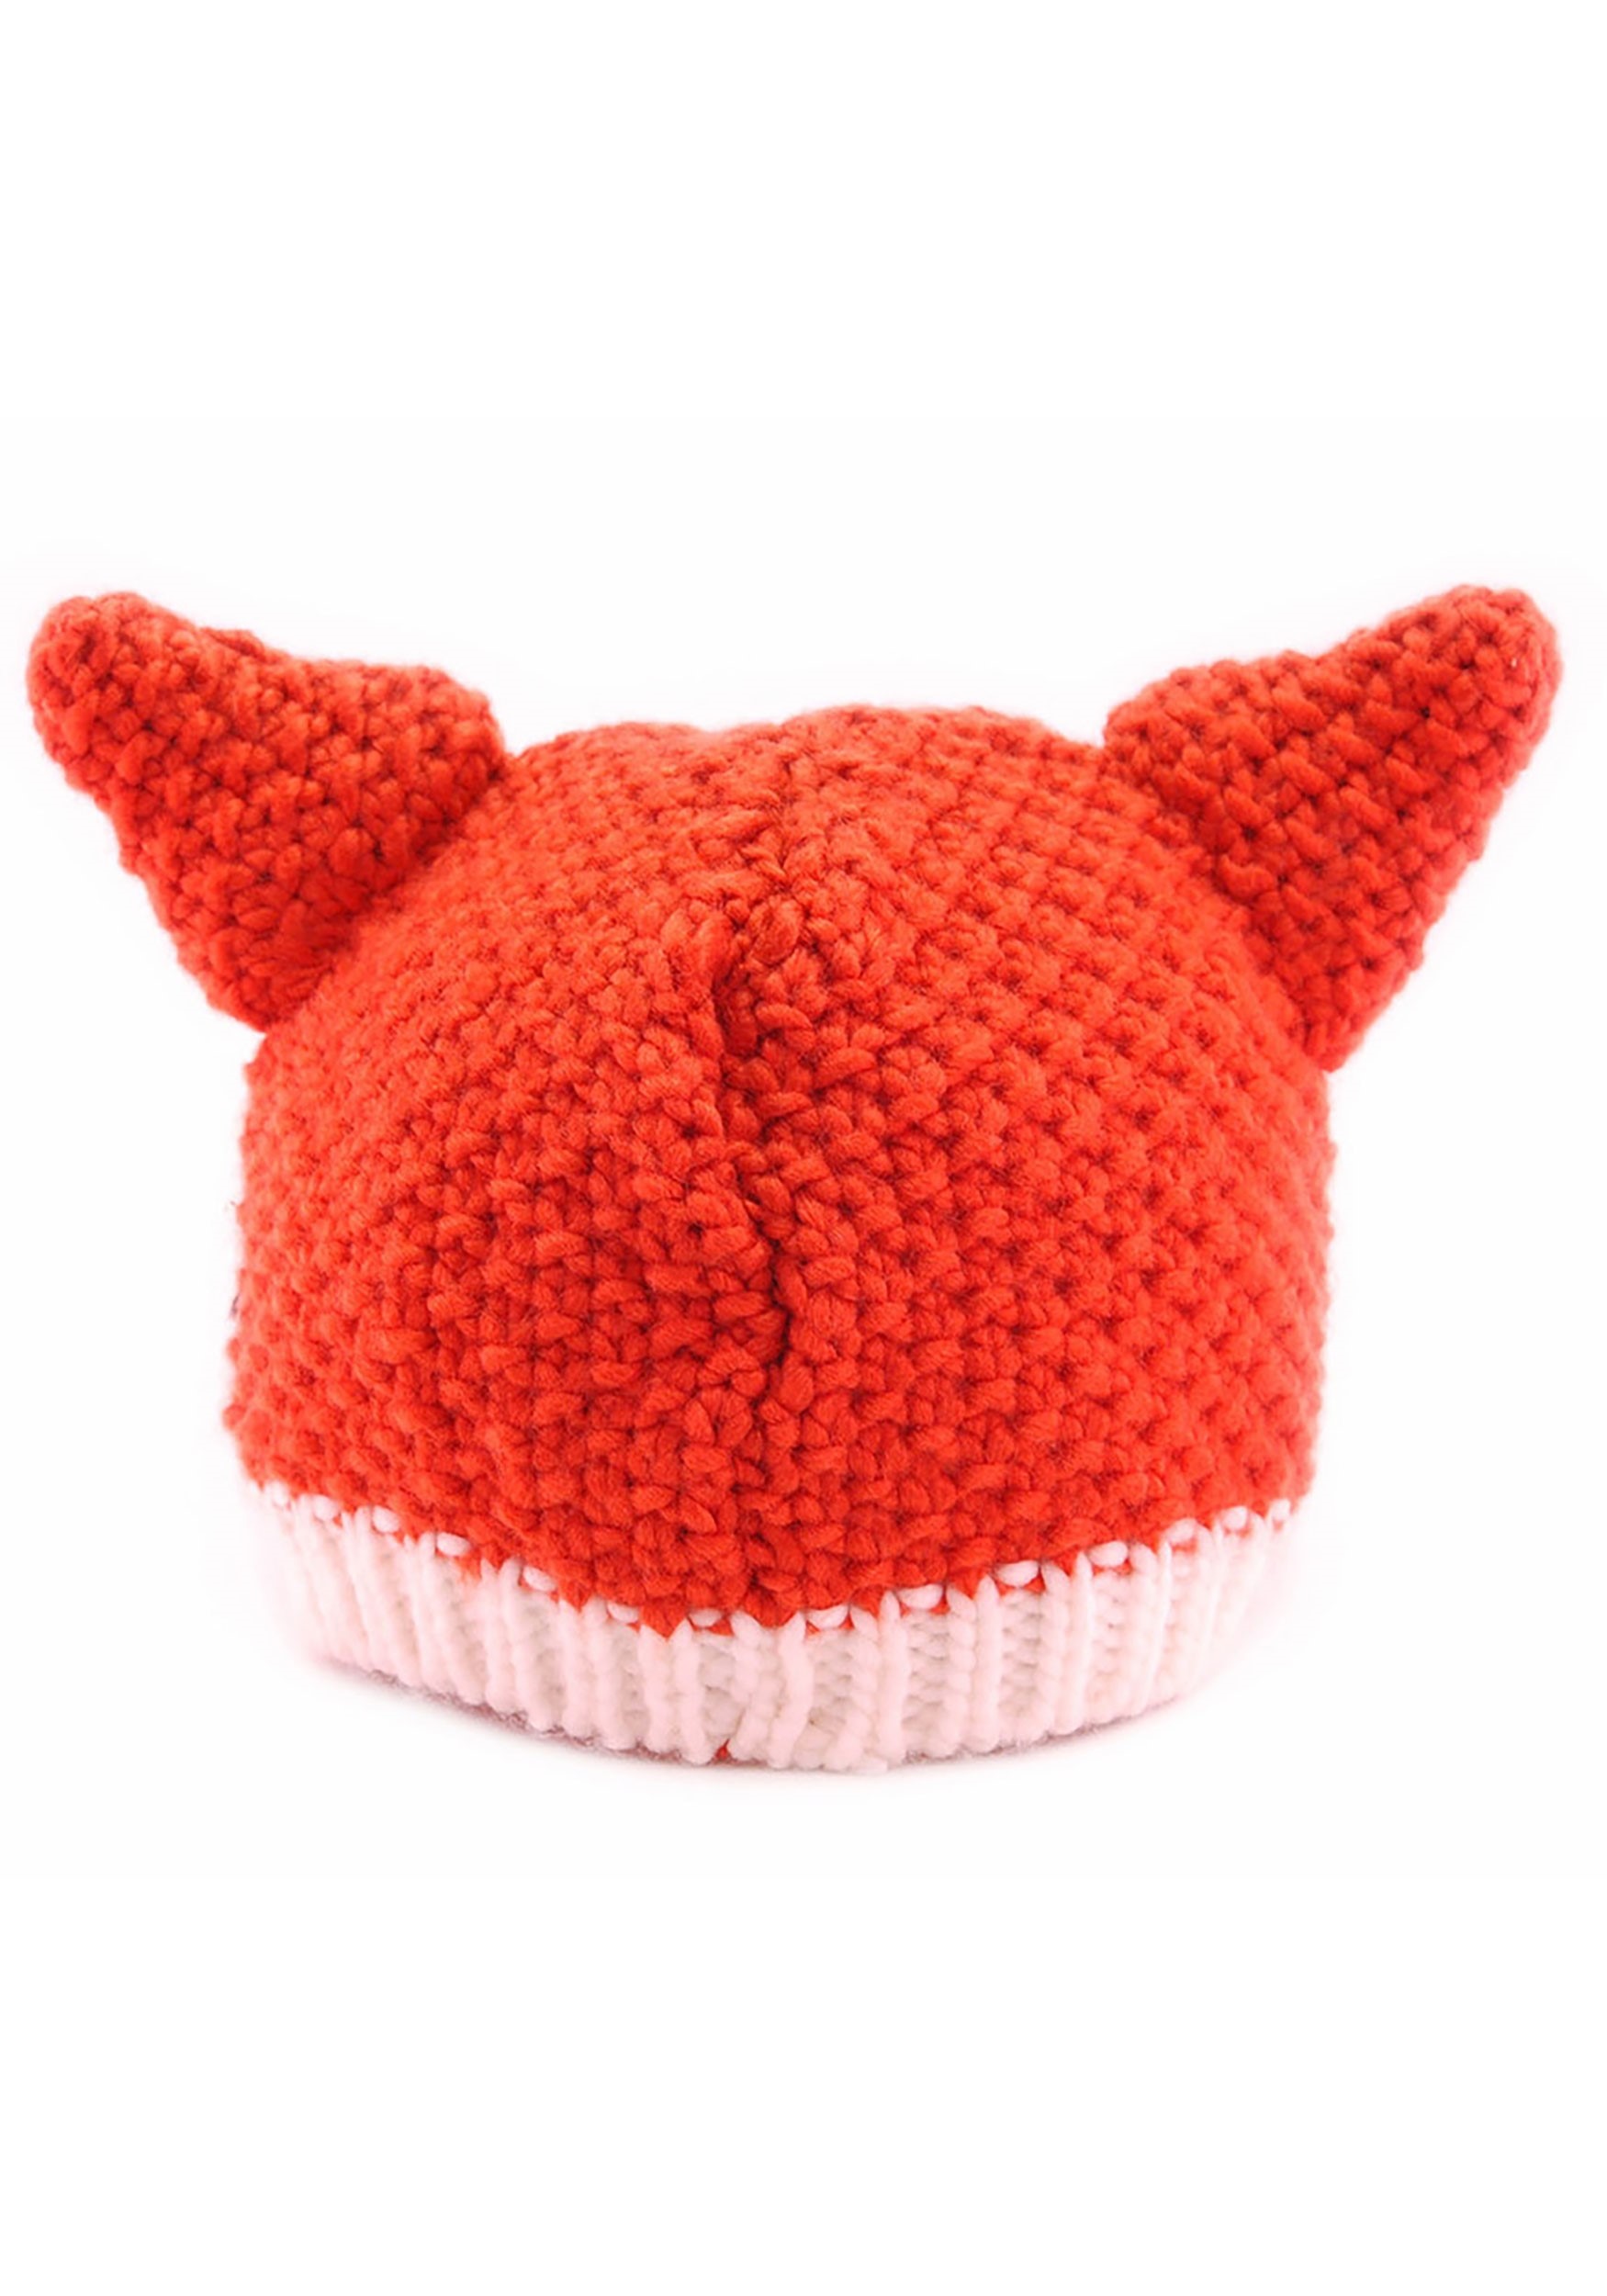 BIBITIME Handmade Knit Fox Beanie with Ears Hat Fun Cosplay Cap for Adult or Kid 